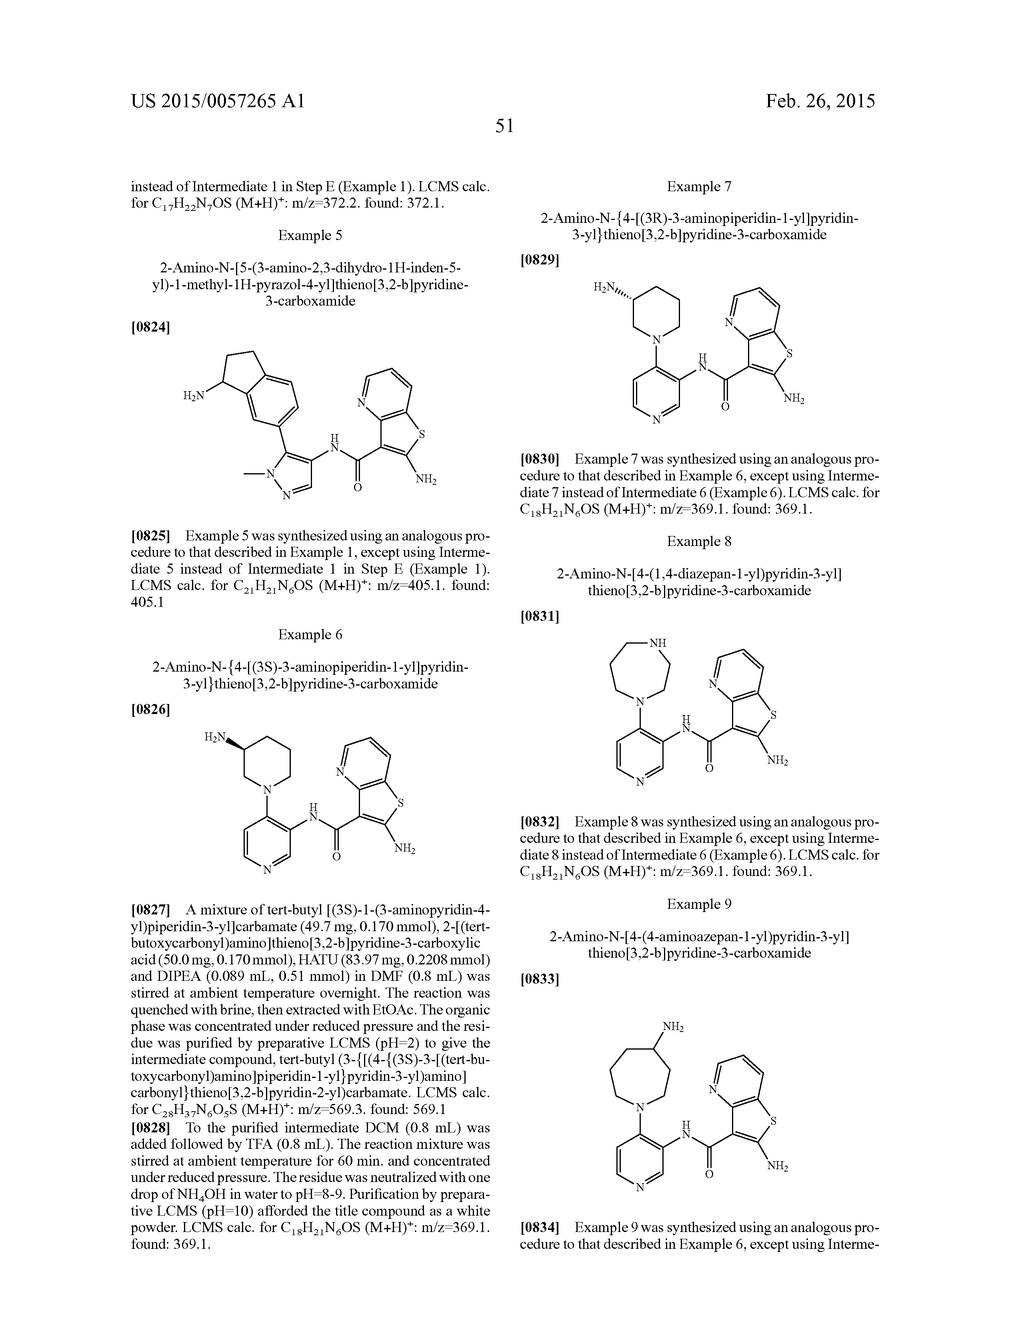 FURO- AND THIENO-PYRIDINE CARBOXAMIDE COMPOUNDS USEFUL AS PIM KINASE     INHIBITORS - diagram, schematic, and image 52